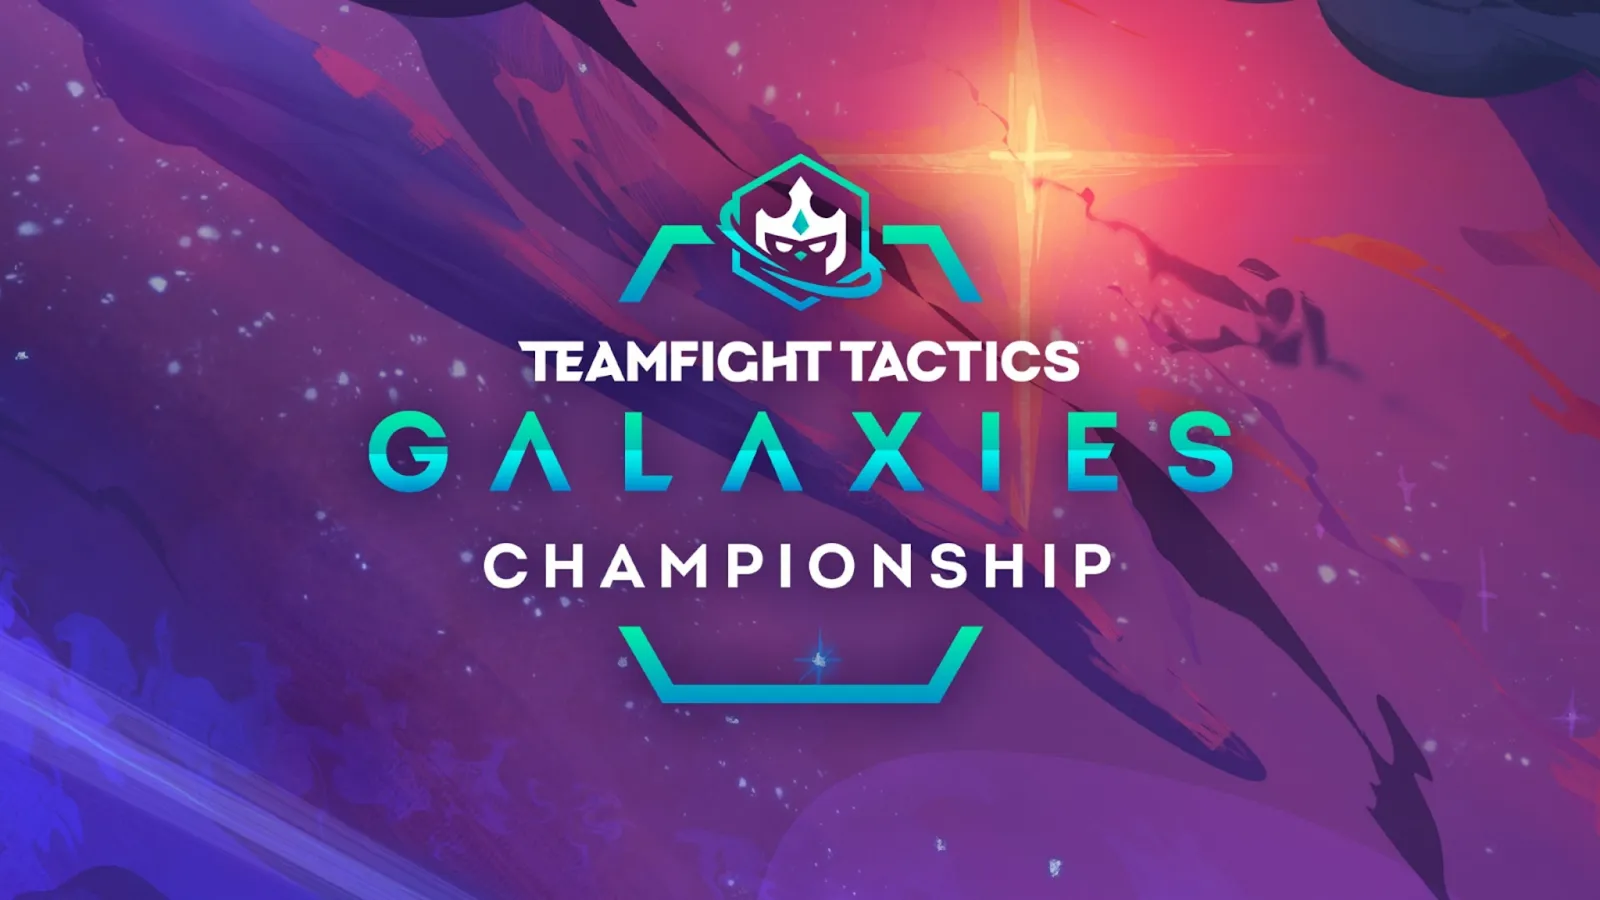 One of the TFT tournaments organized by Riot Games to promote the game.